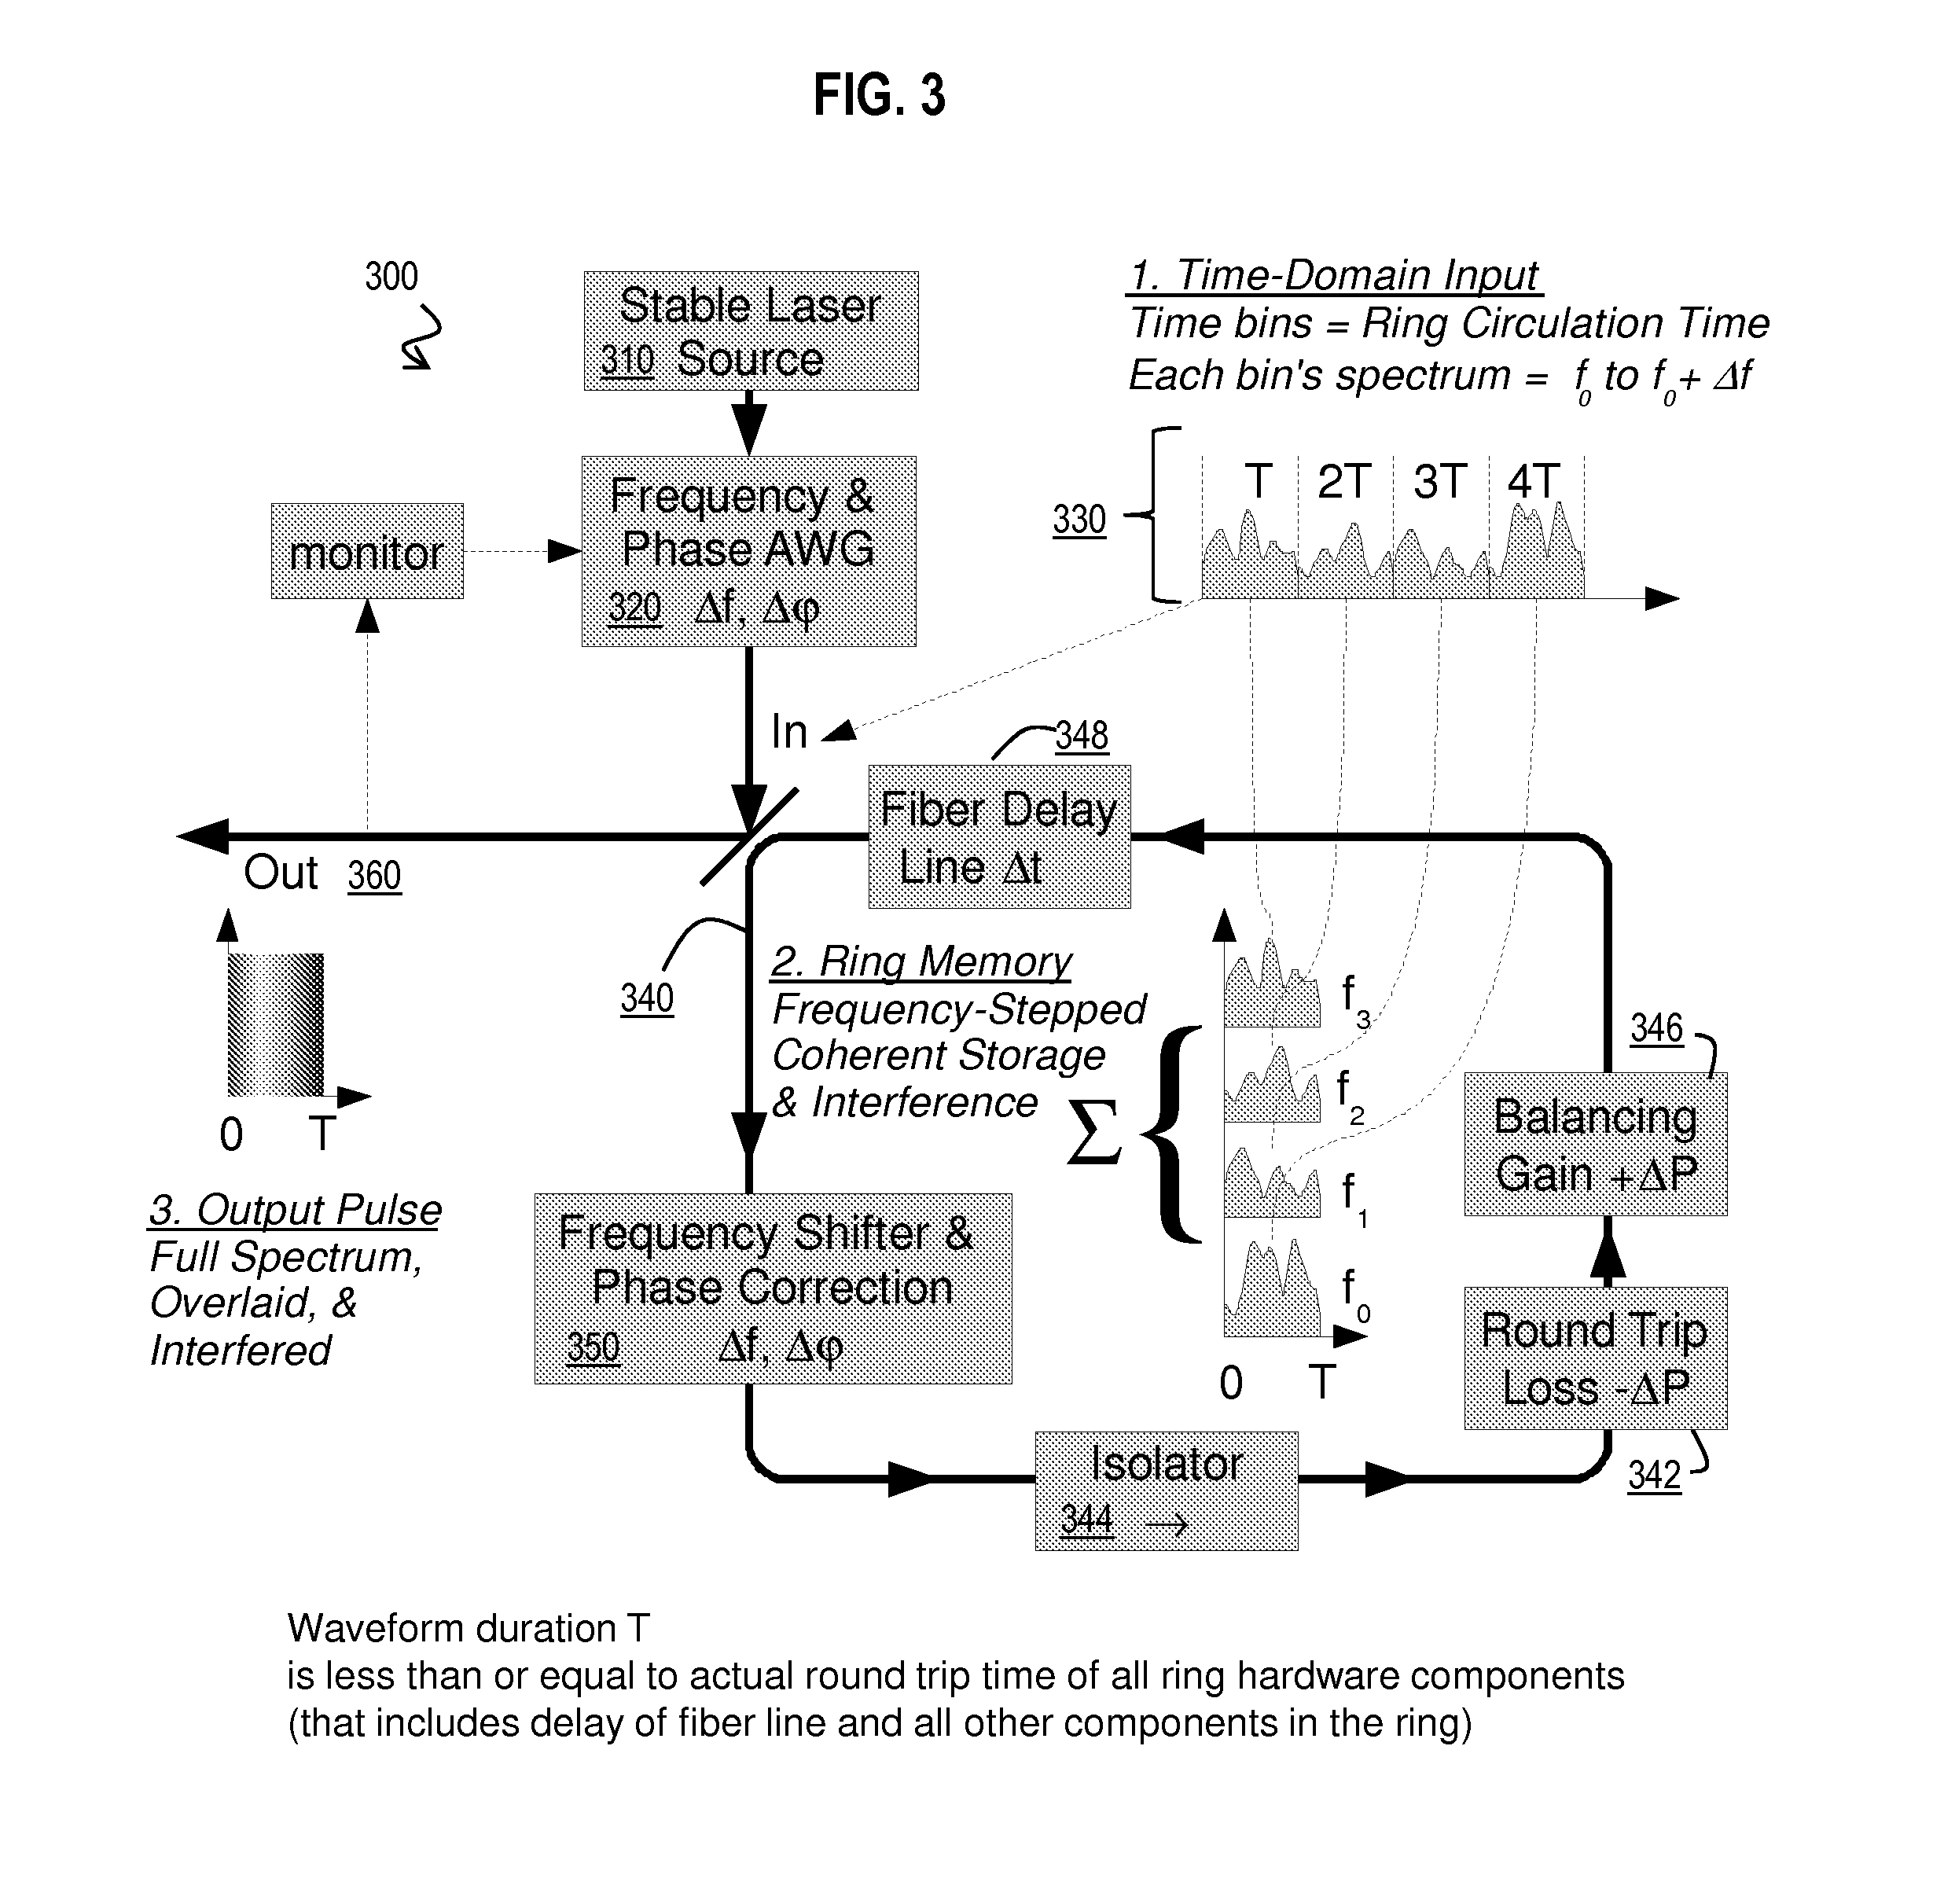 Method and Apparatus for Generation of Arbitrary Waveforms with Large Bandwidth and Long Time Apertures